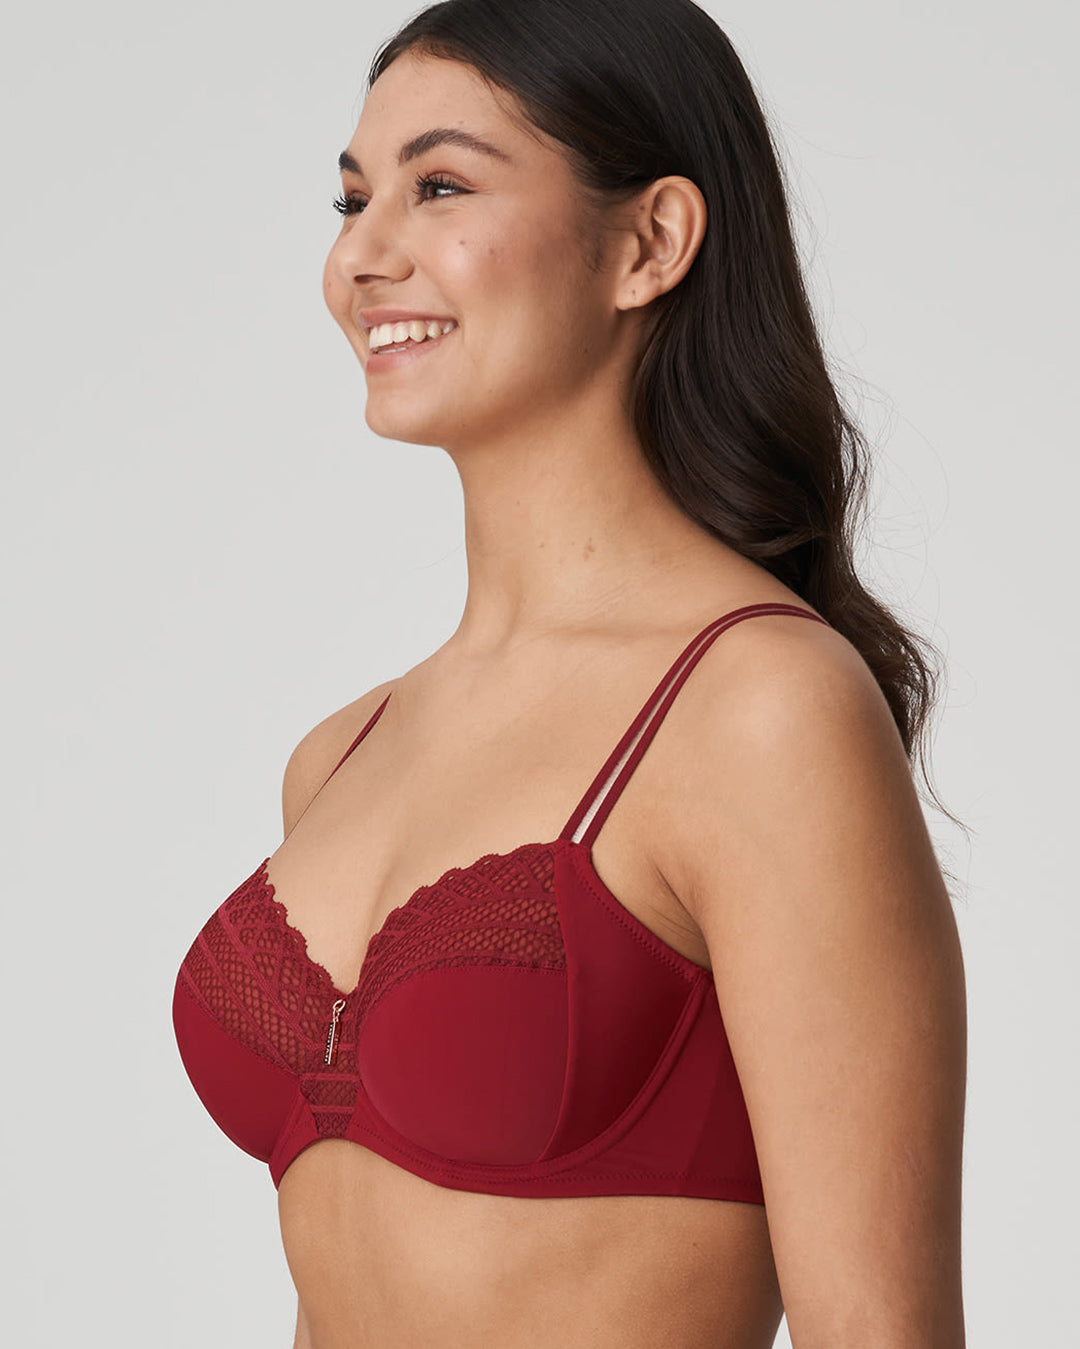 PRIMA DONNA TWIST EAST END RED BOUDOIR FULL CUP BRA